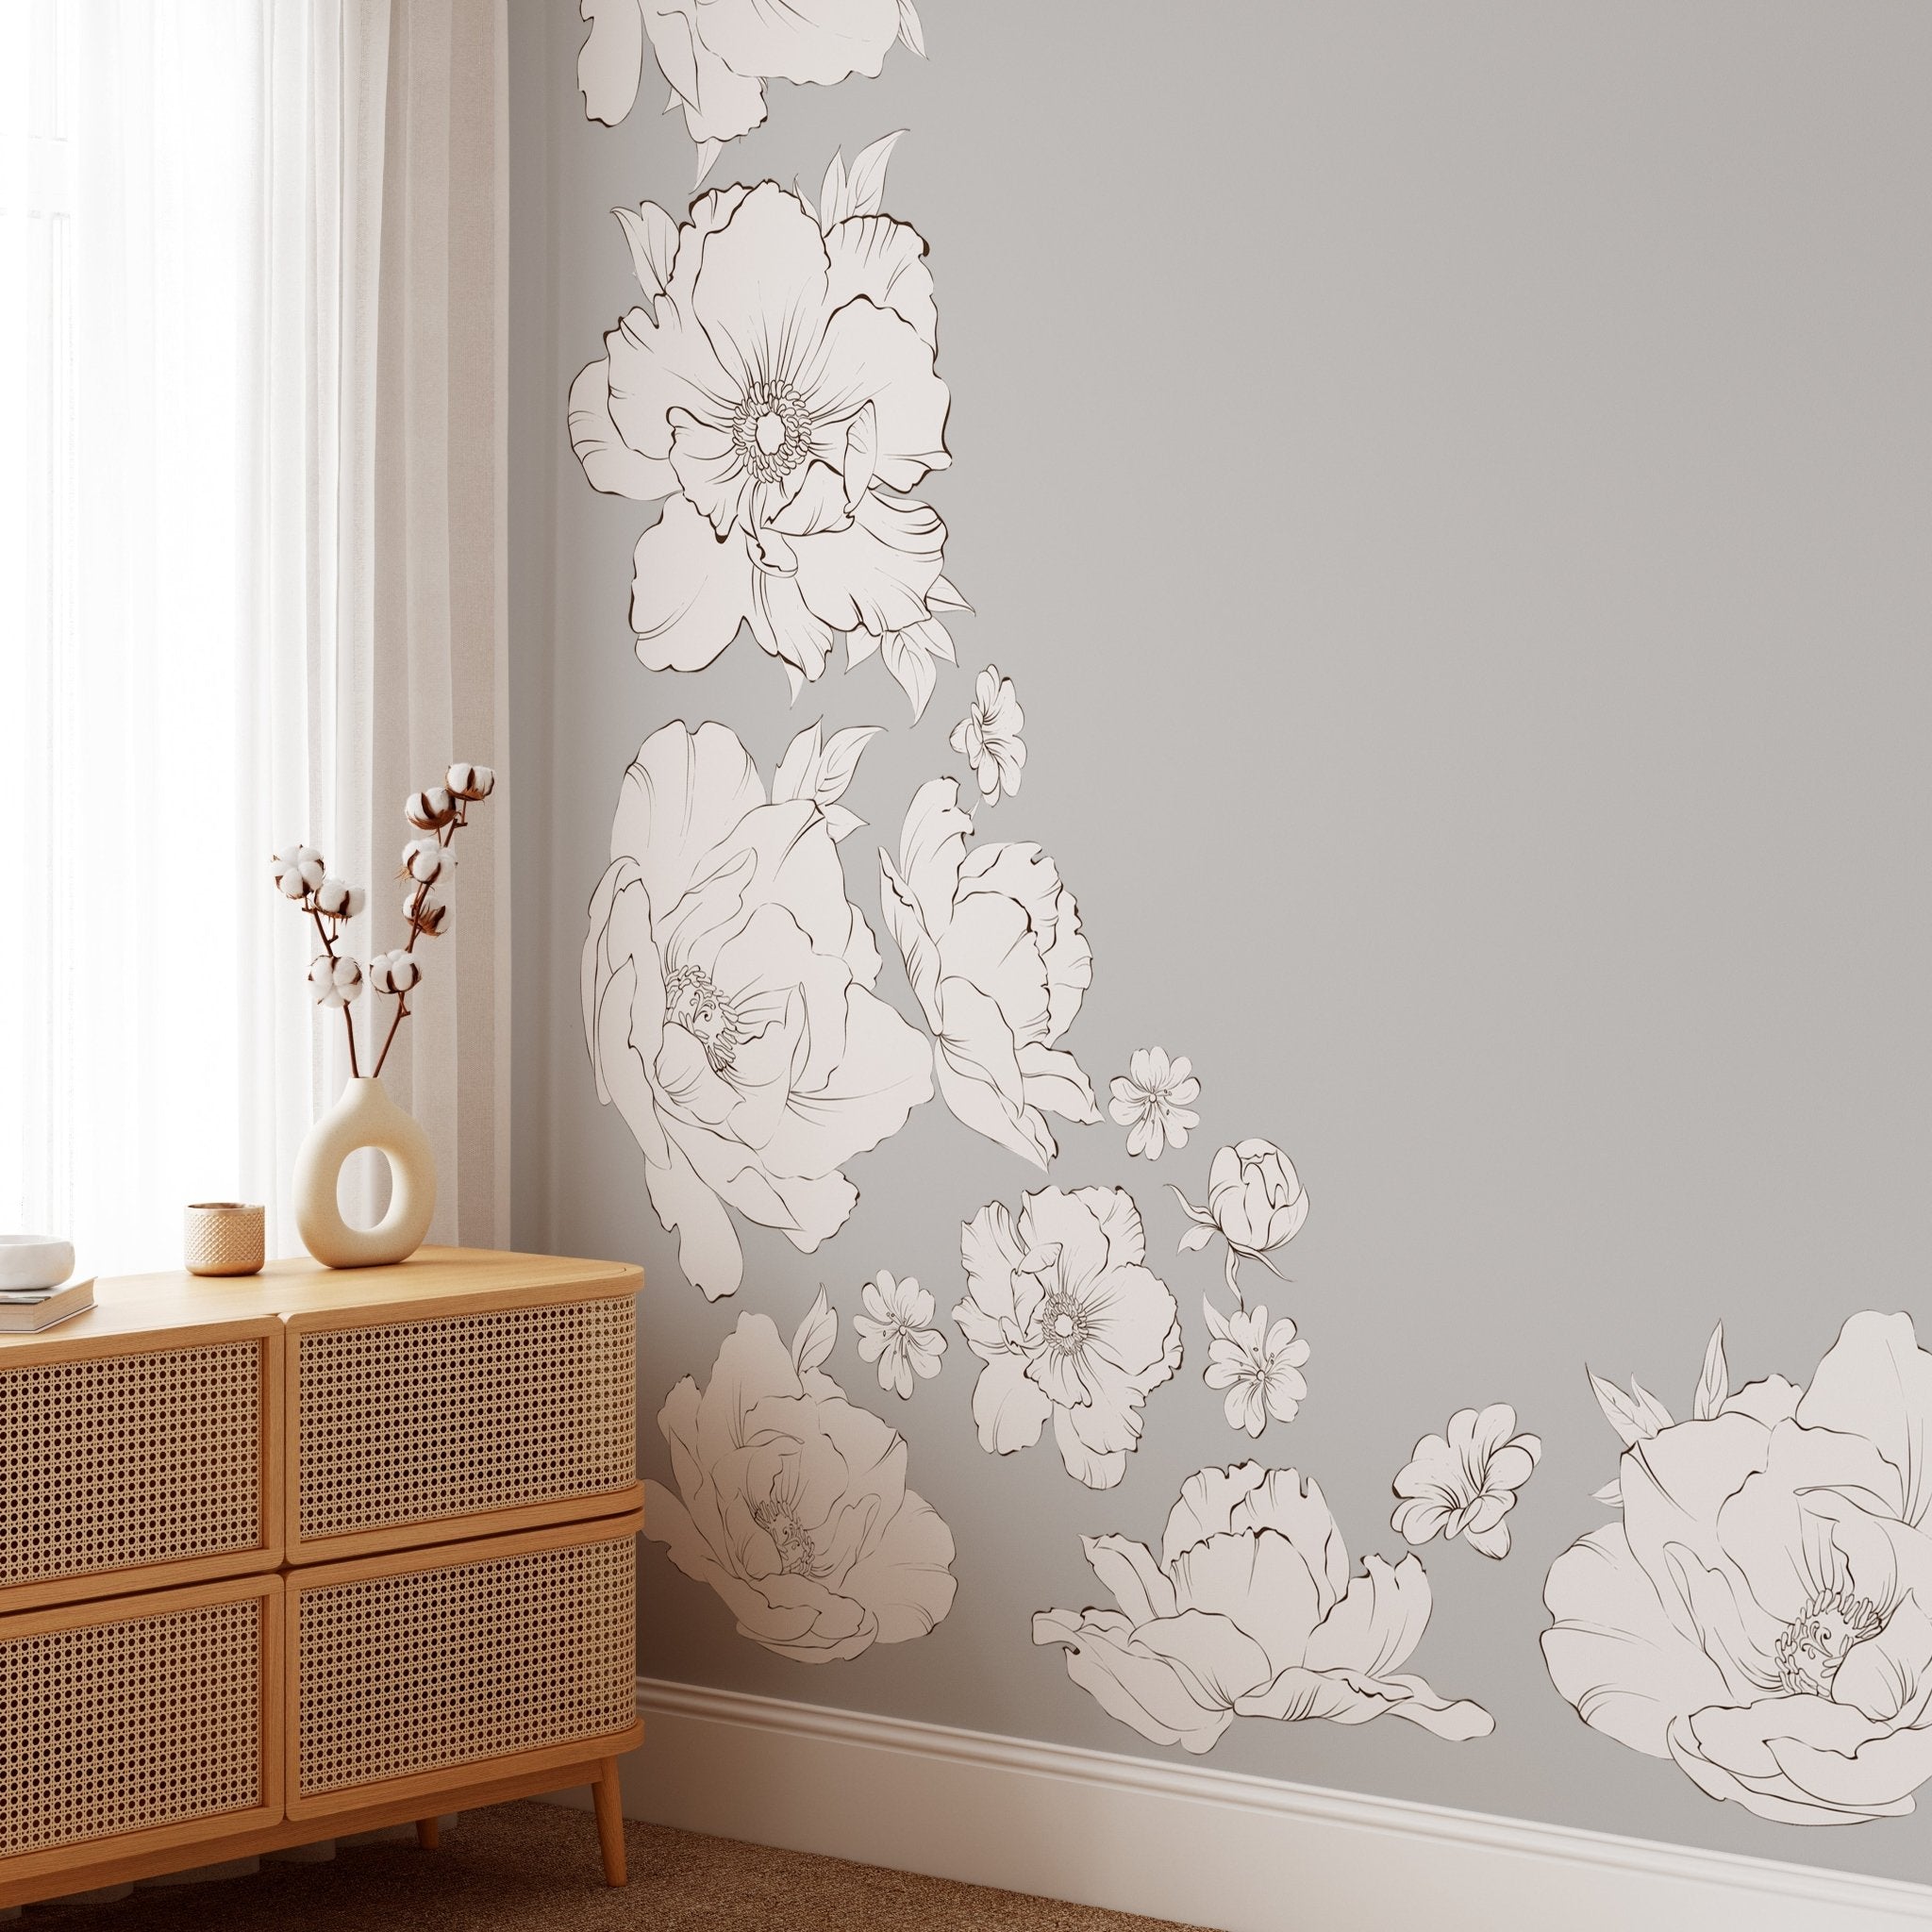 Modern home decor showcasing large, peel-and-stick peony wall decals in a minimalist setting. The removable flower decals elegantly frame a wicker chest and enhance the room's calm, neutral aesthetic